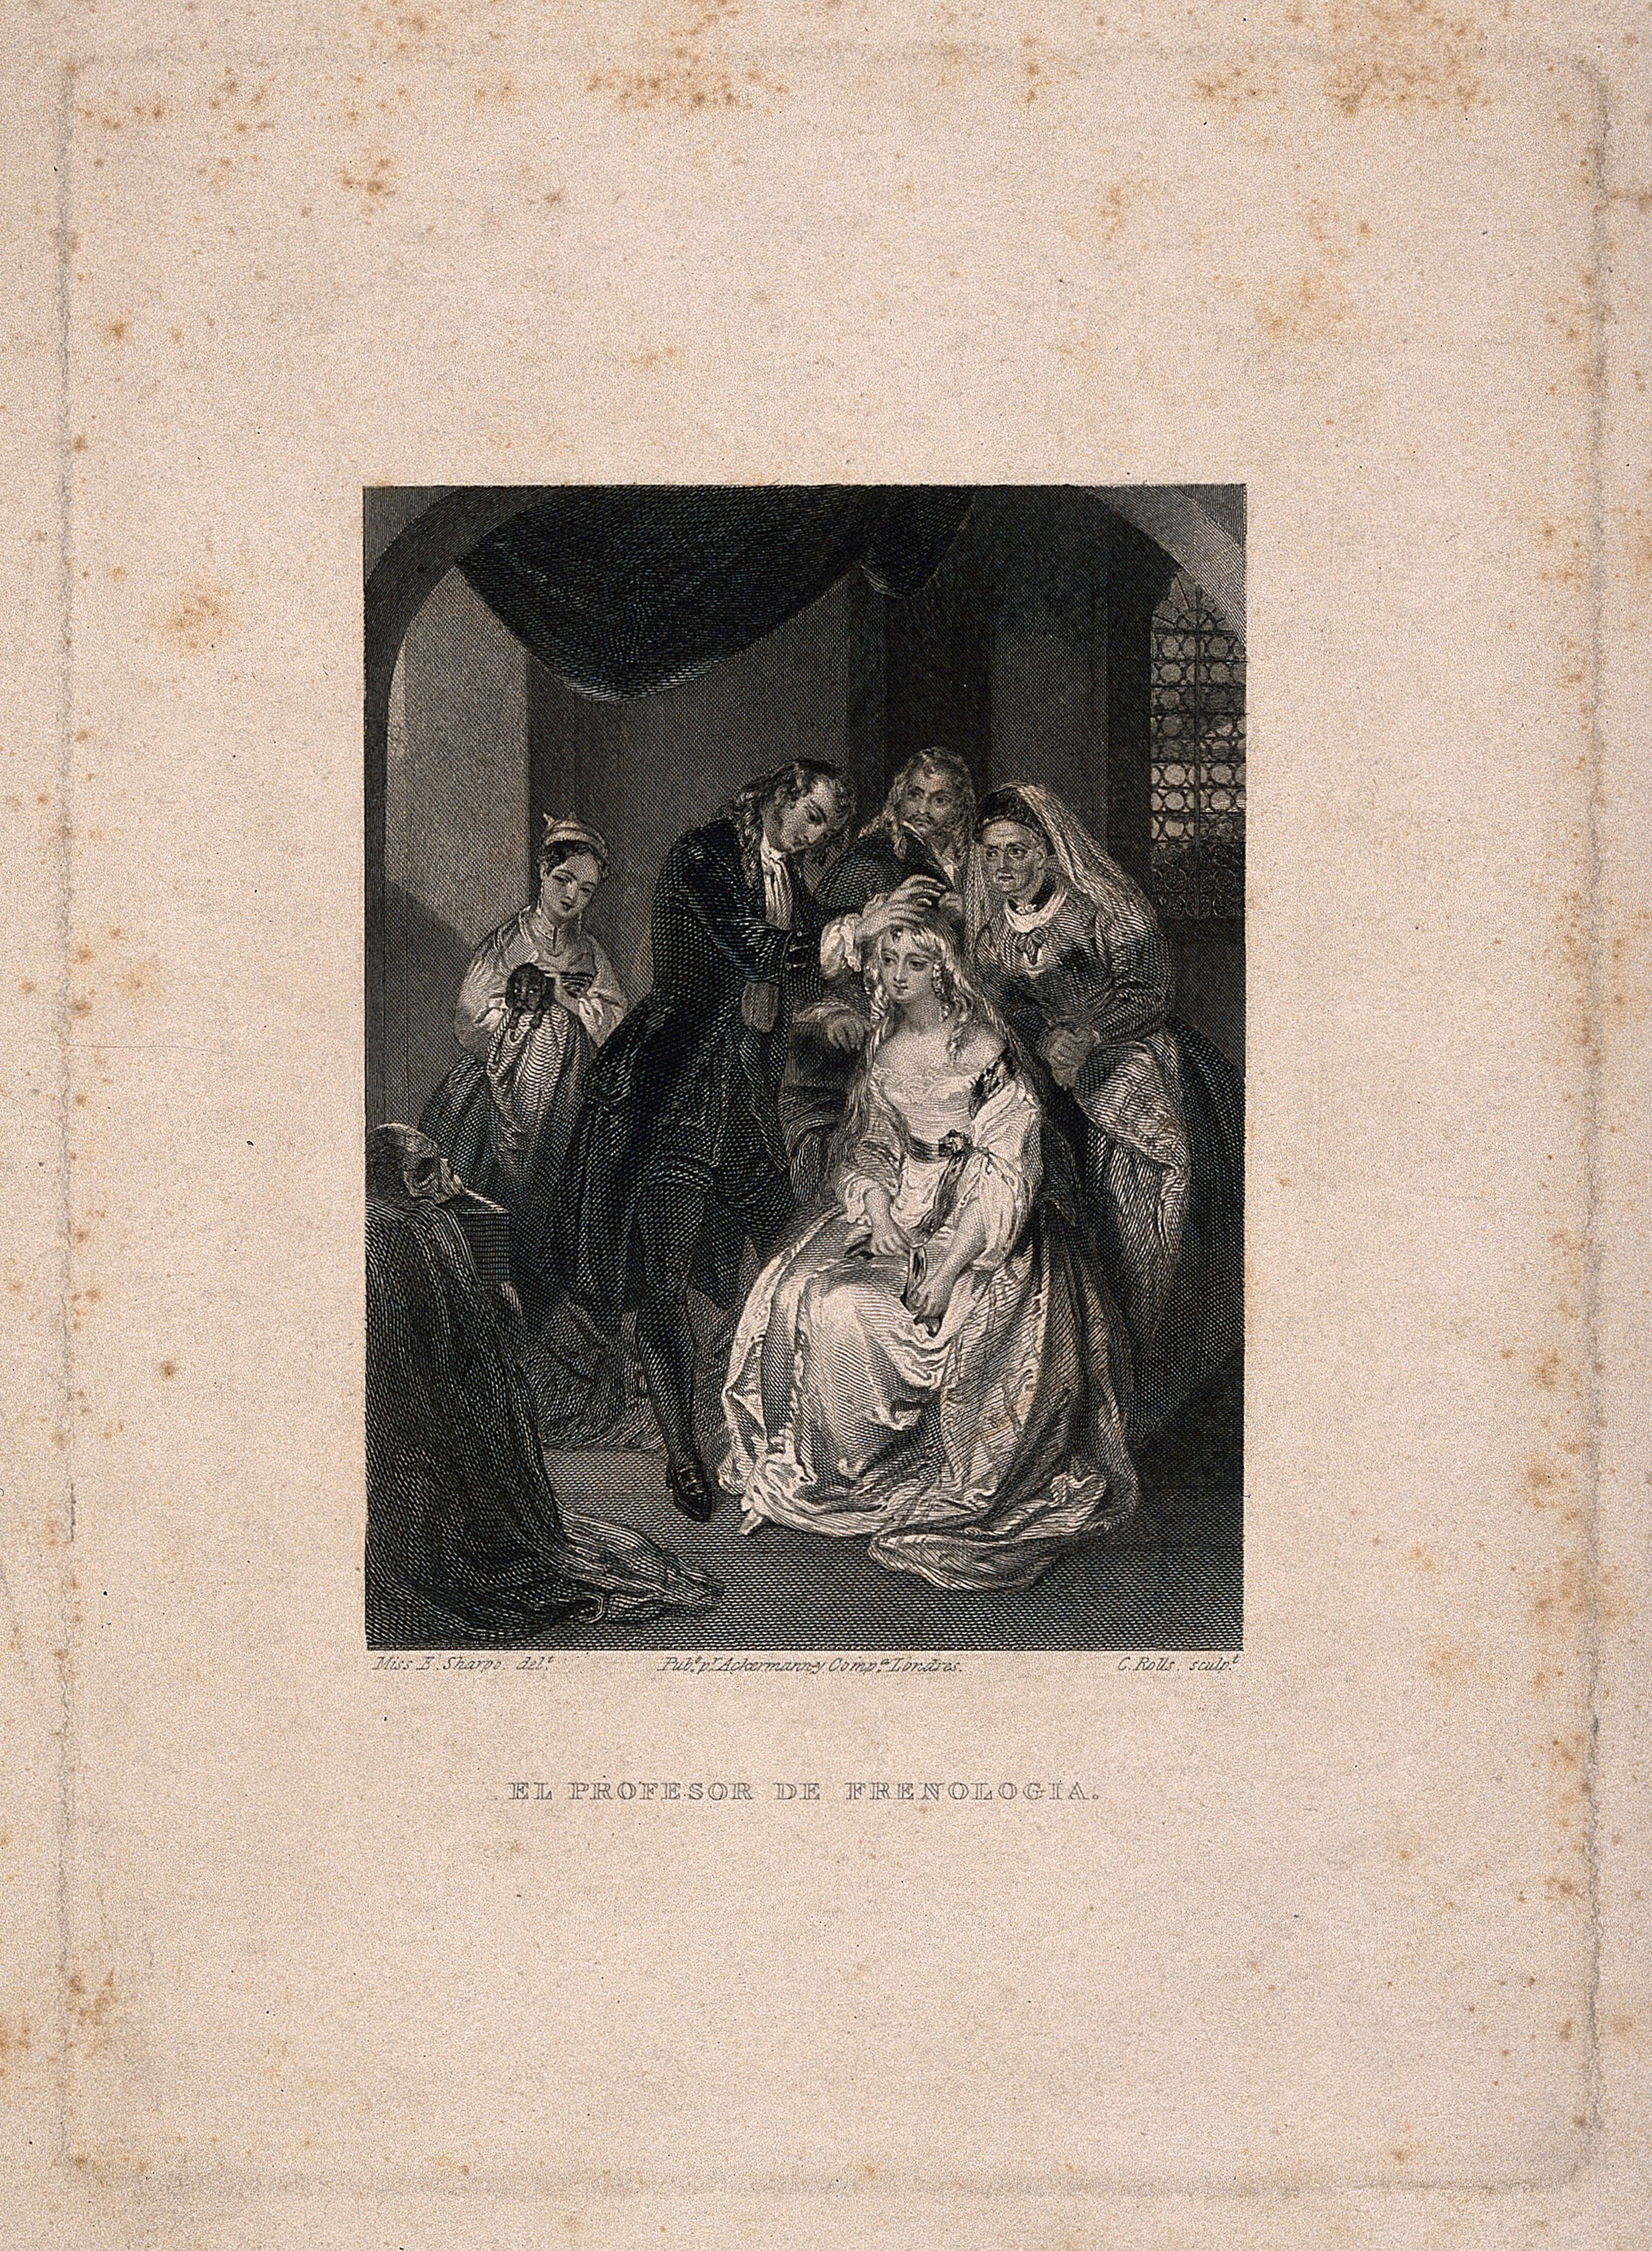 A phrenologist at work on a girl, surrounded by members of her family. Engraving by C. Rolls after E. Sharpe, c. 1830.